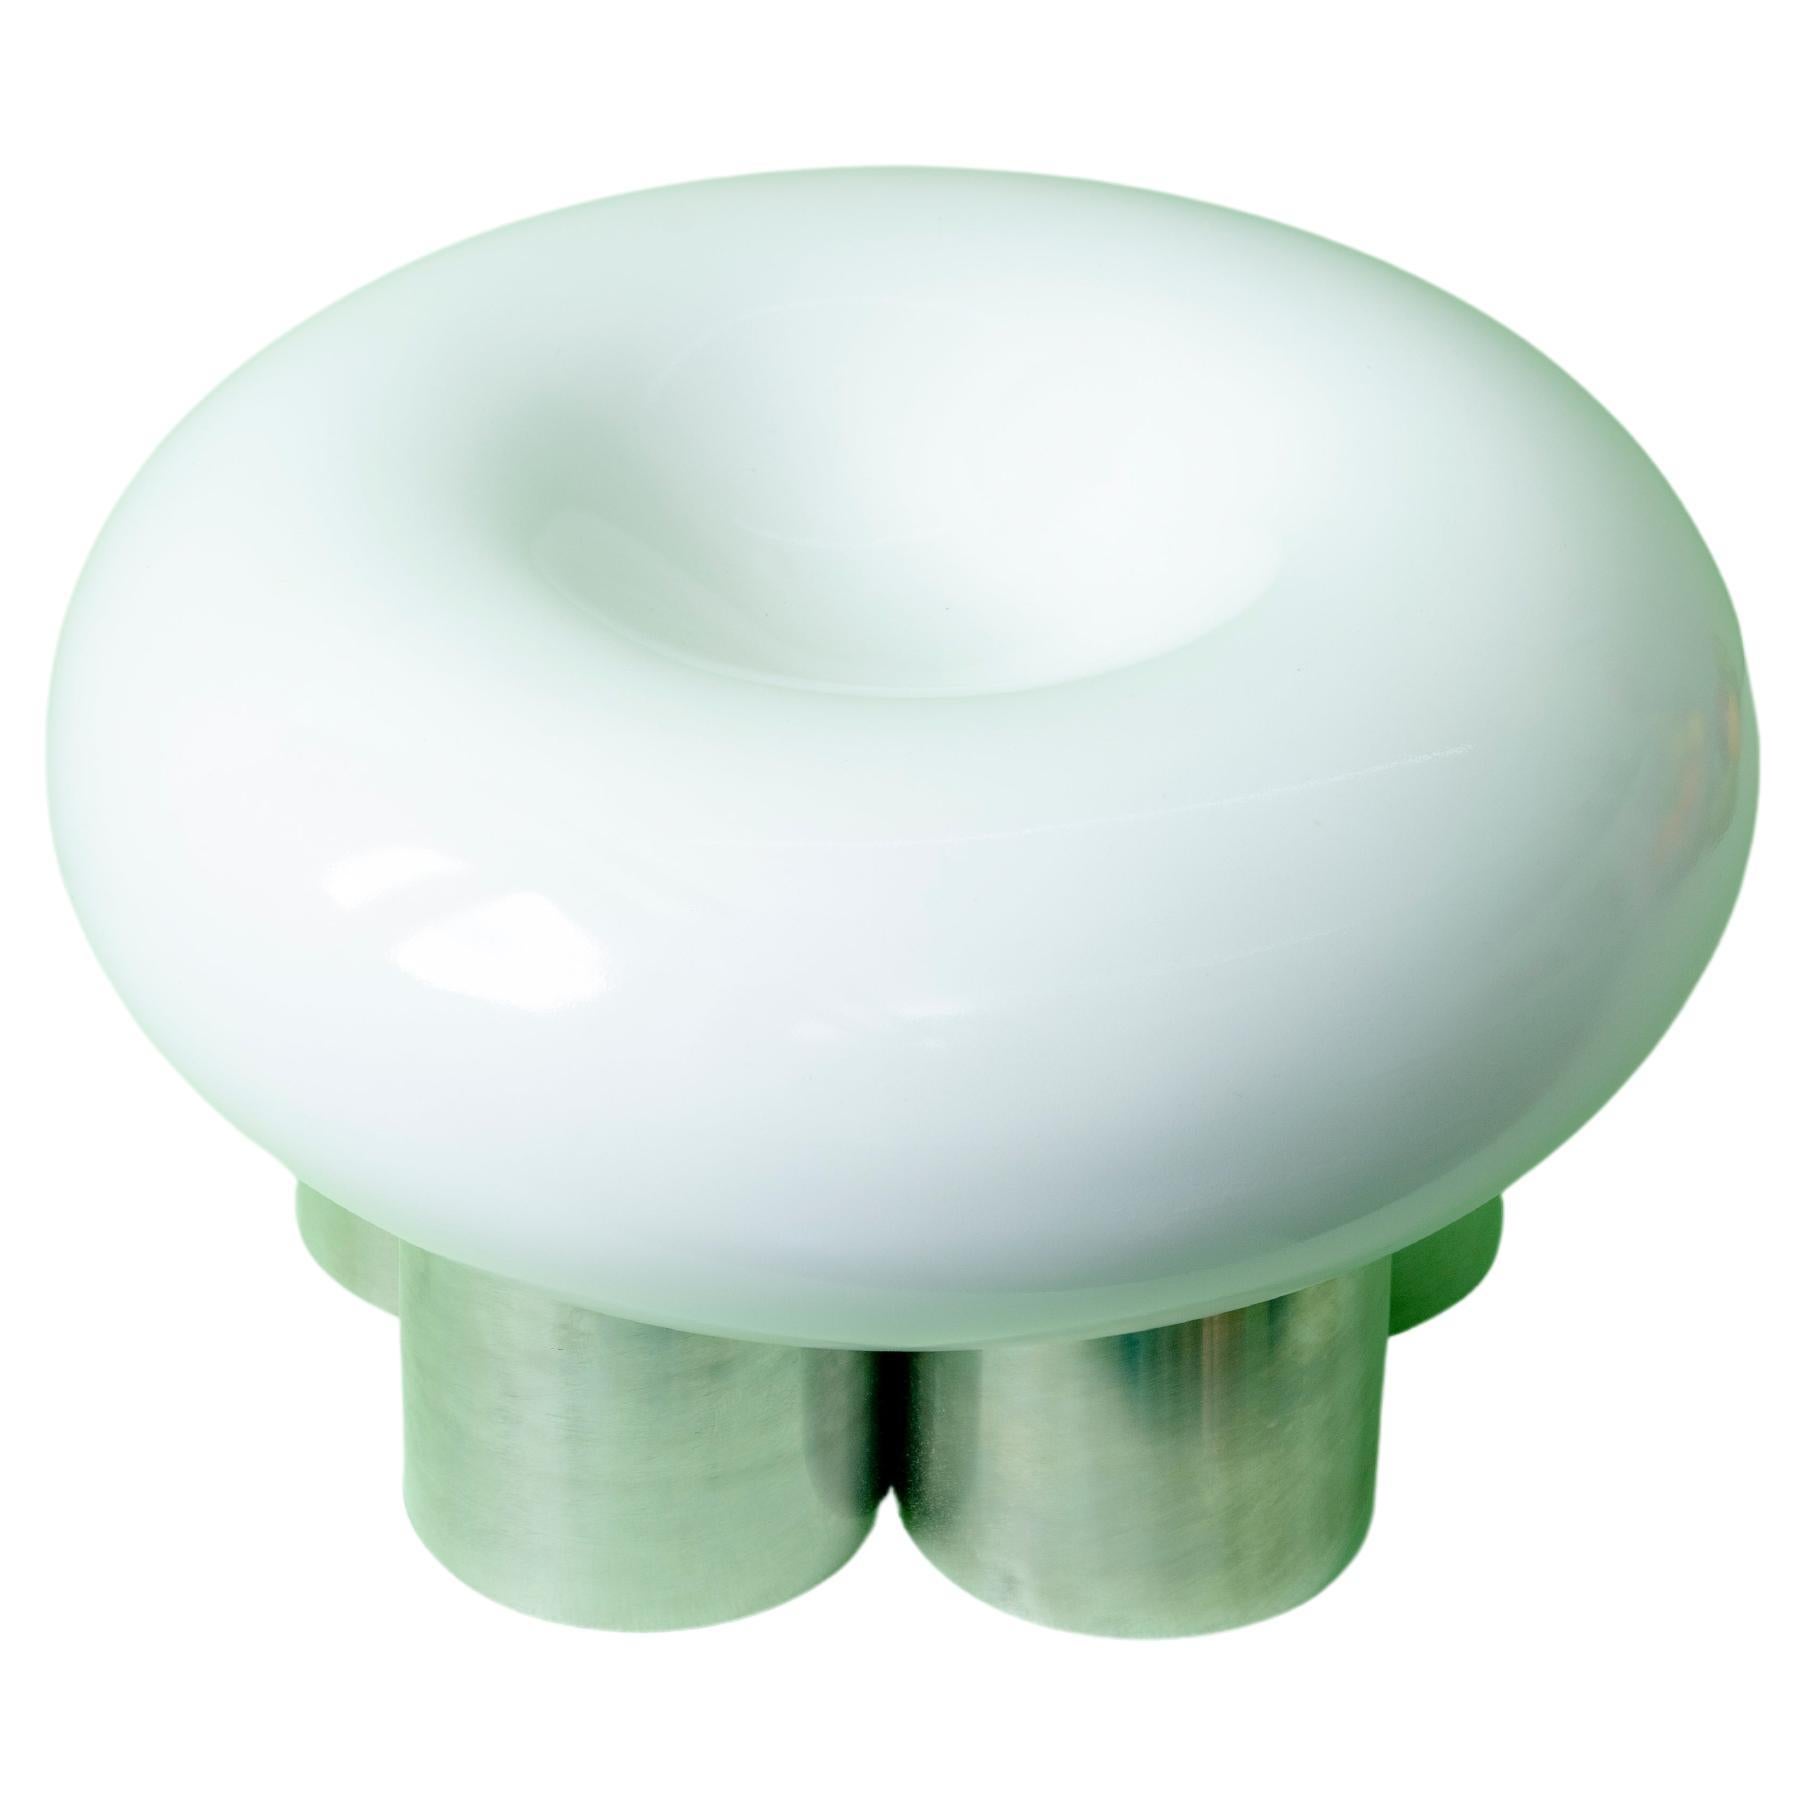 High Gloss Tabletop Minimal & Playful Cloud Vessel and Bowl For Sale